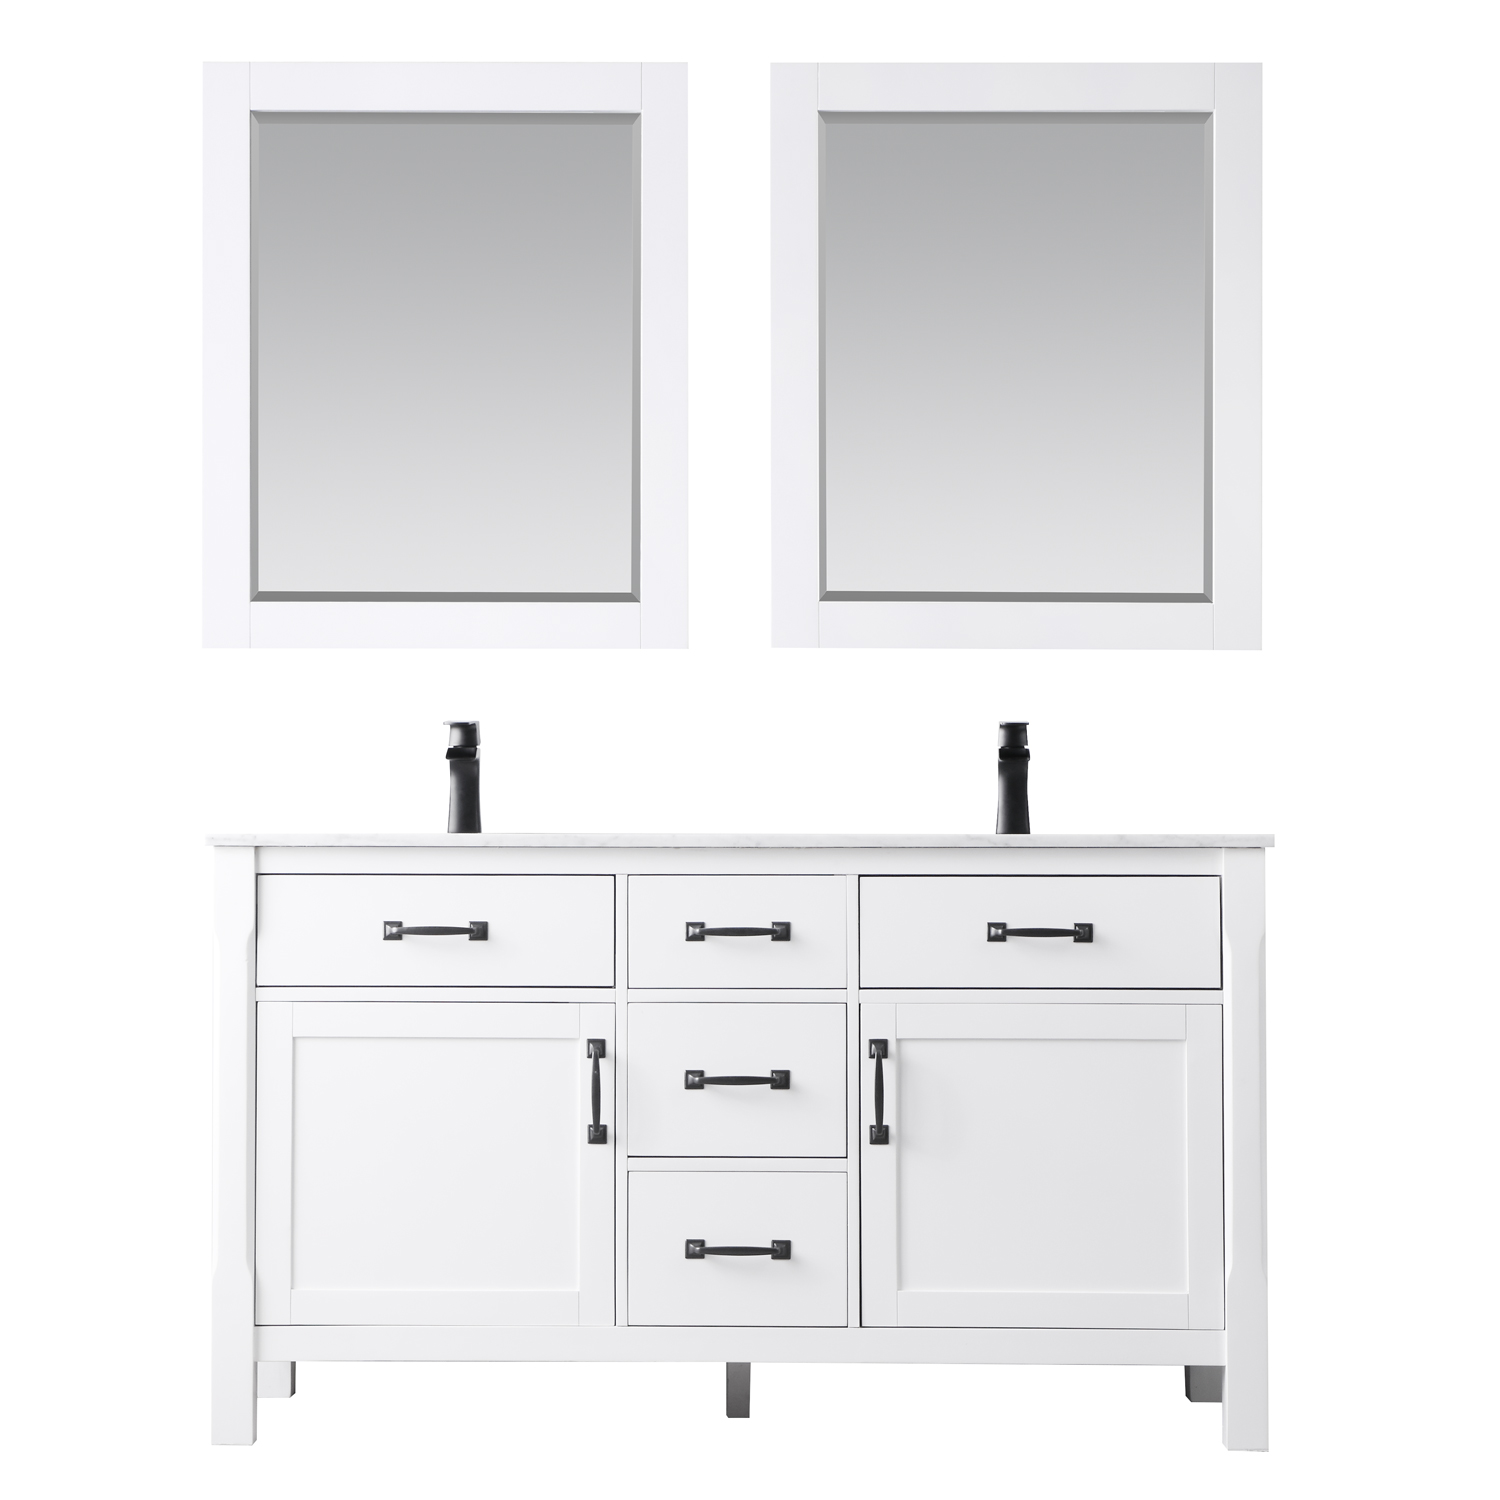 Issac Edwards Collection 60" Double Bathroom Vanity Set in White and Carrara White Marble Countertop with Mirror 